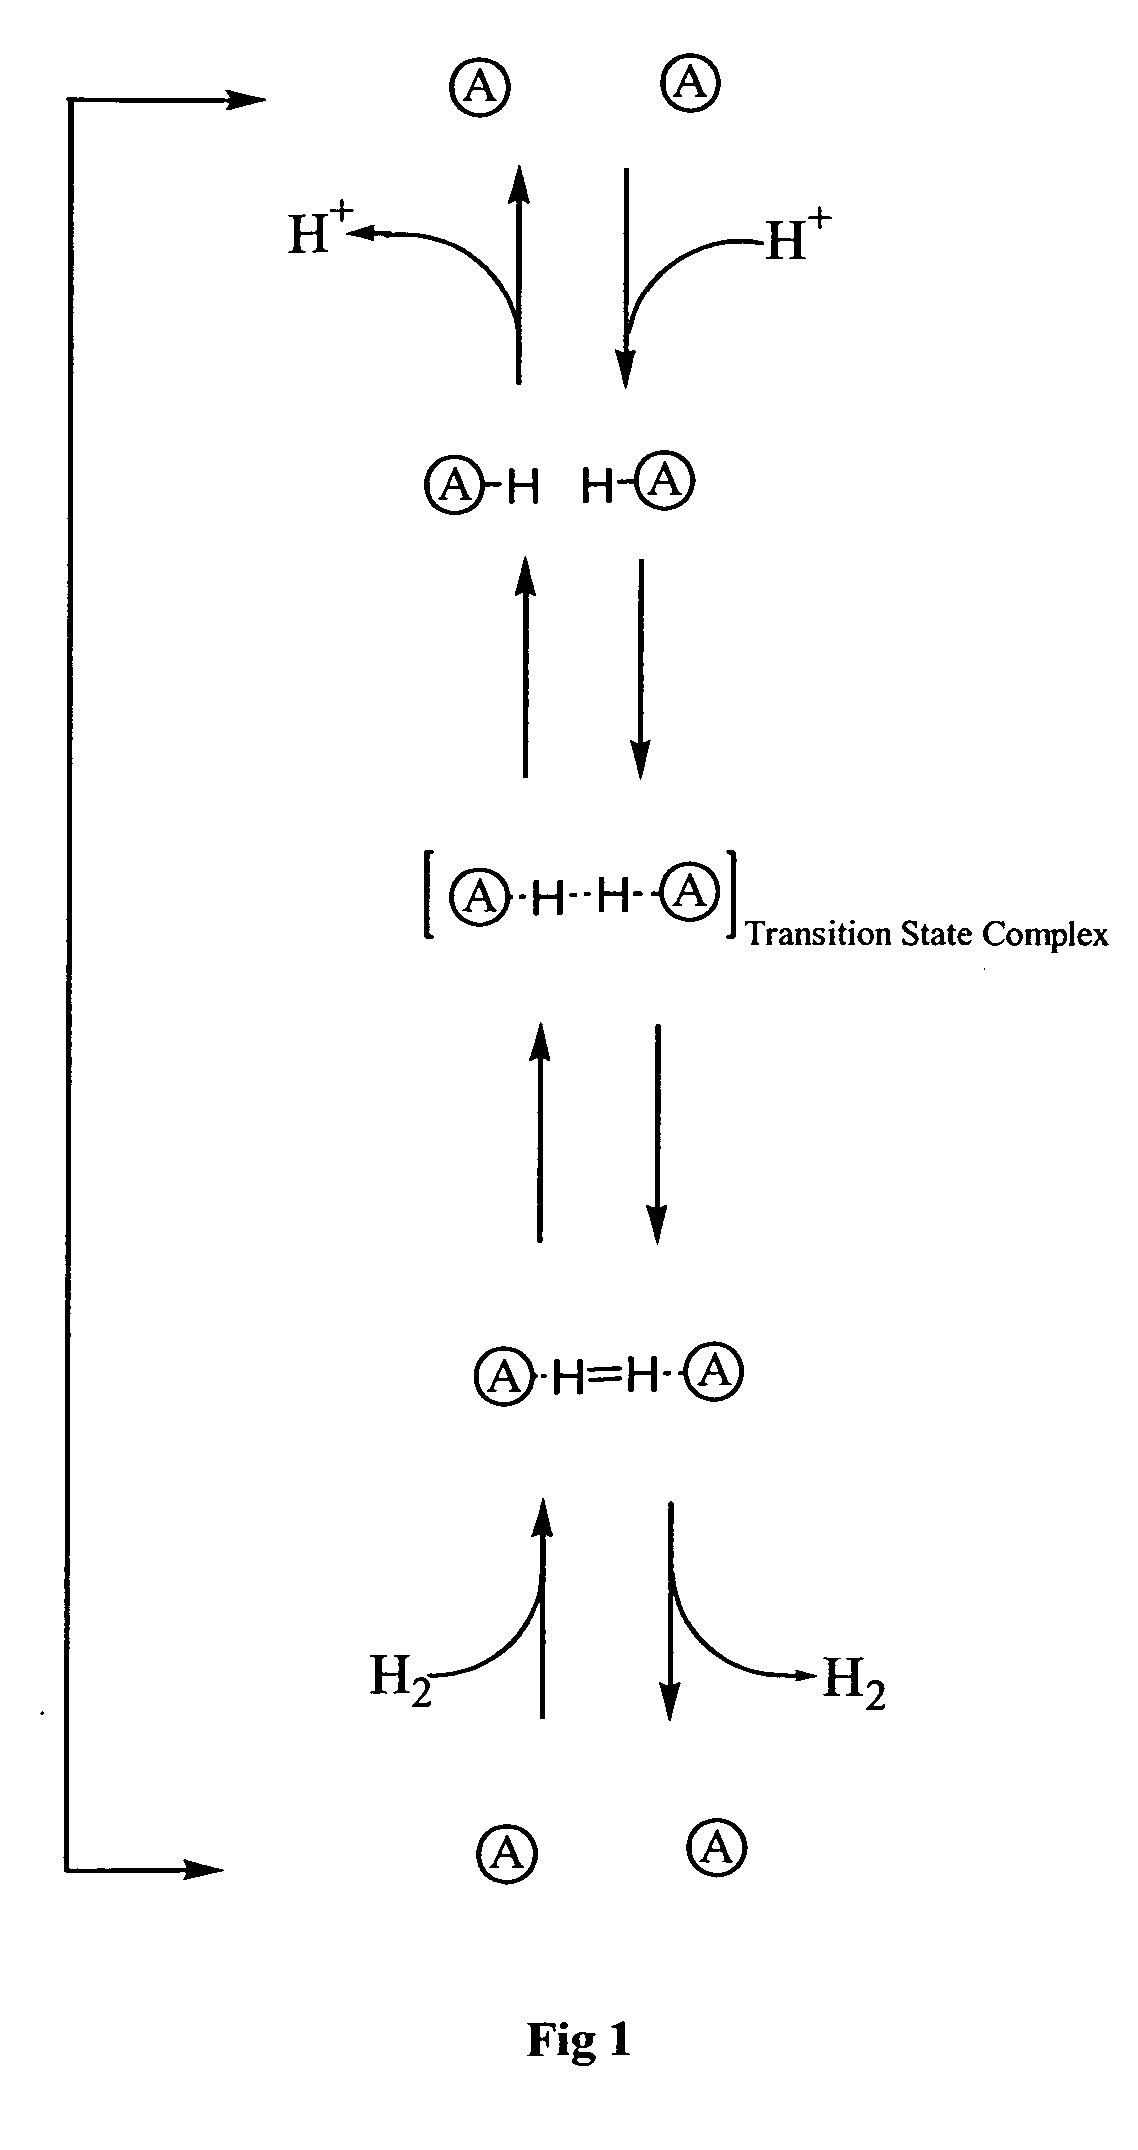 Novel catalysts and processes for their preparation